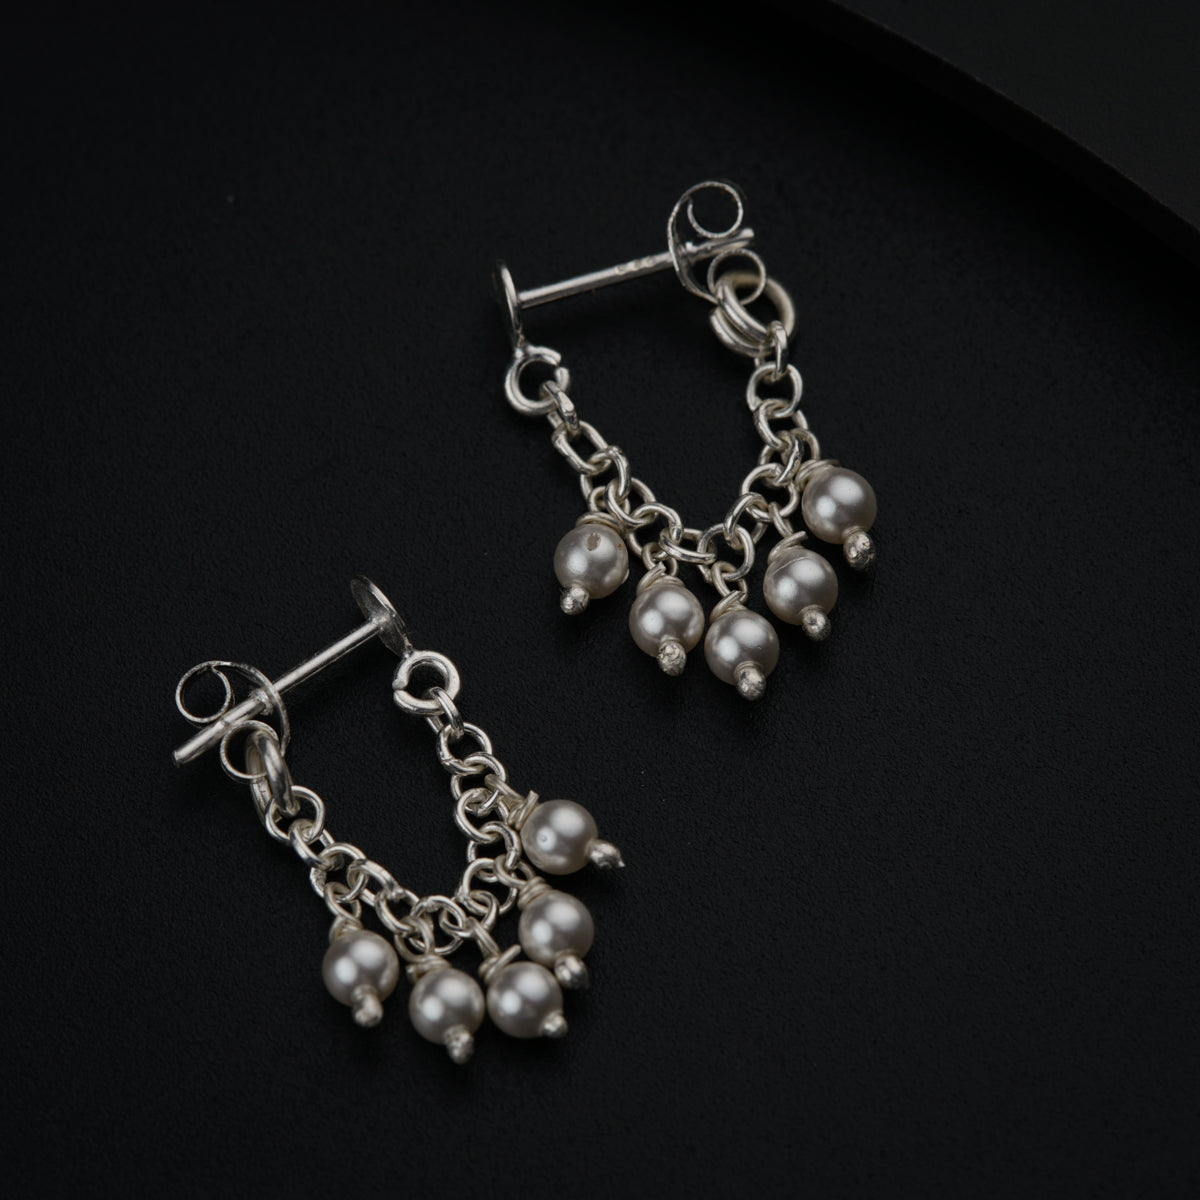 a pair of dangling earrings on a black surface